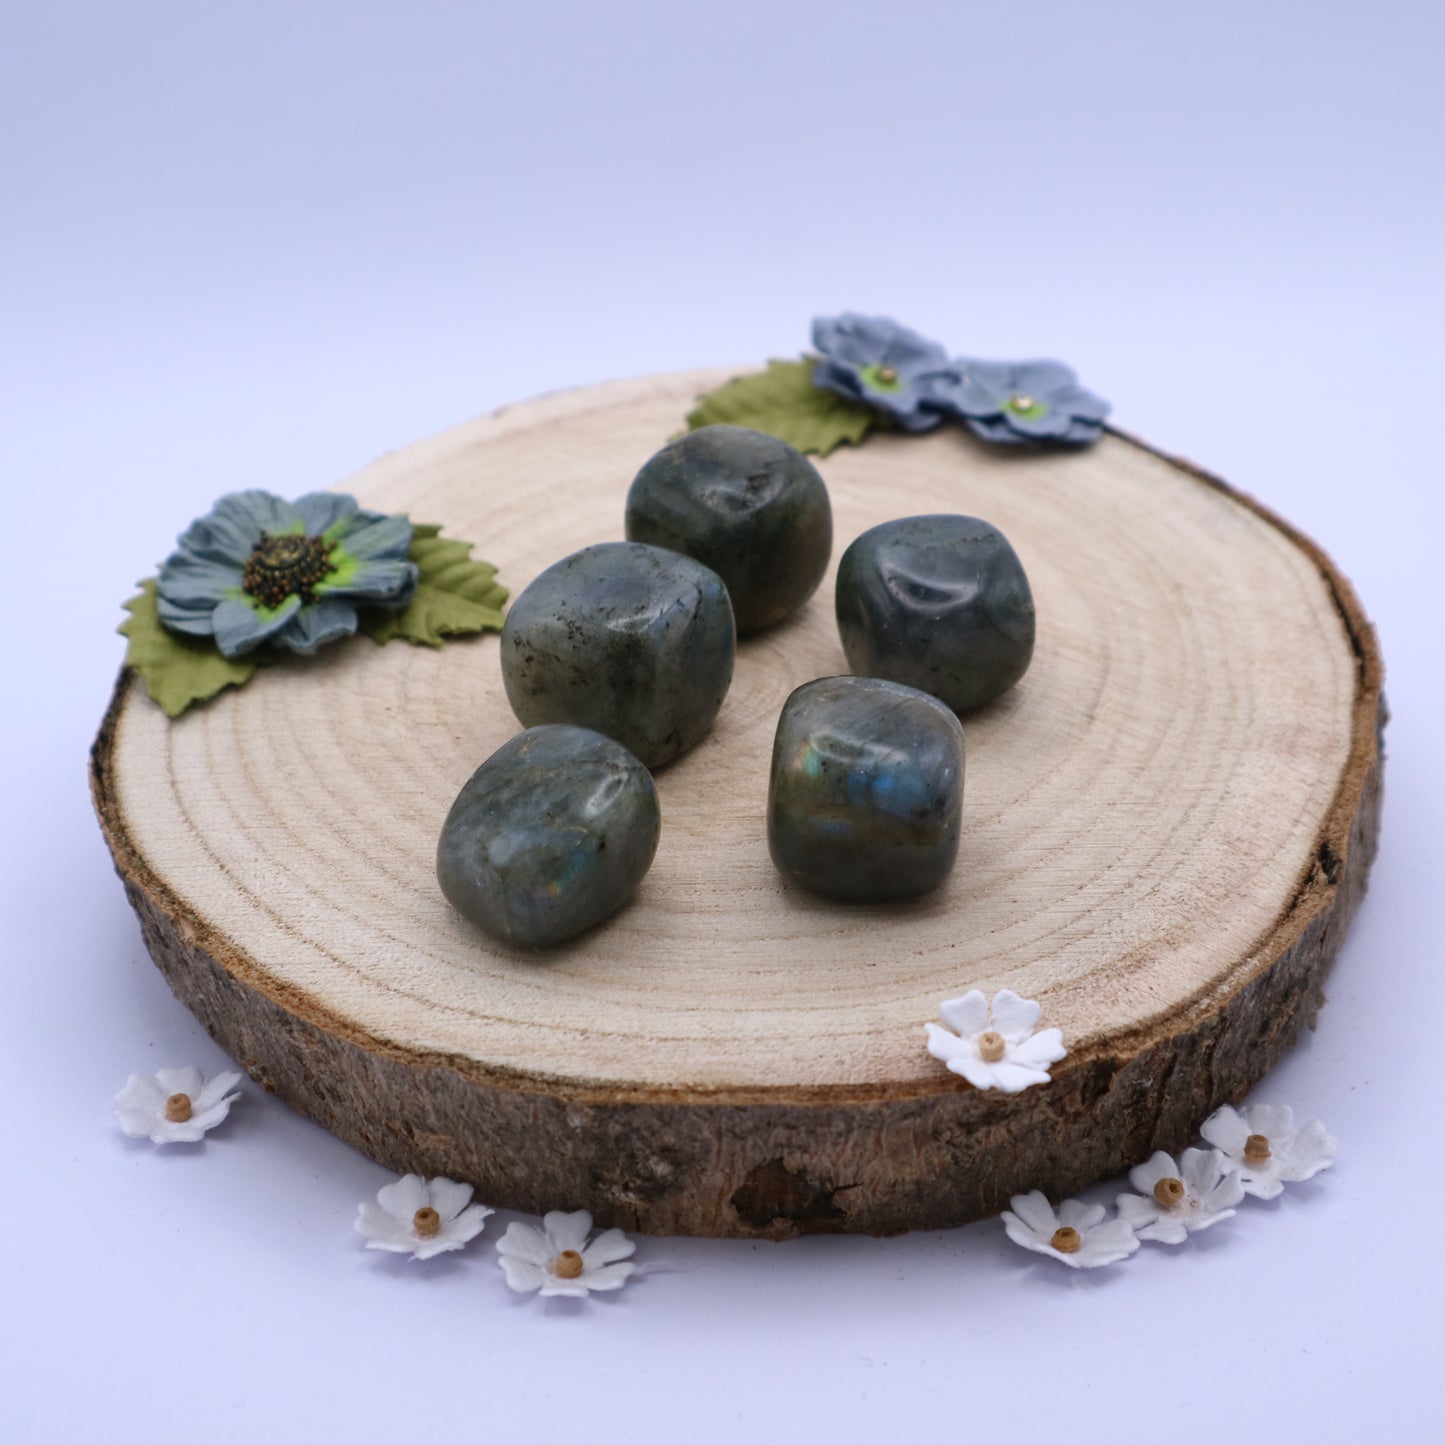 Five pieces of Labradorite crystals displayed on a piece of wood surrounded by flowers